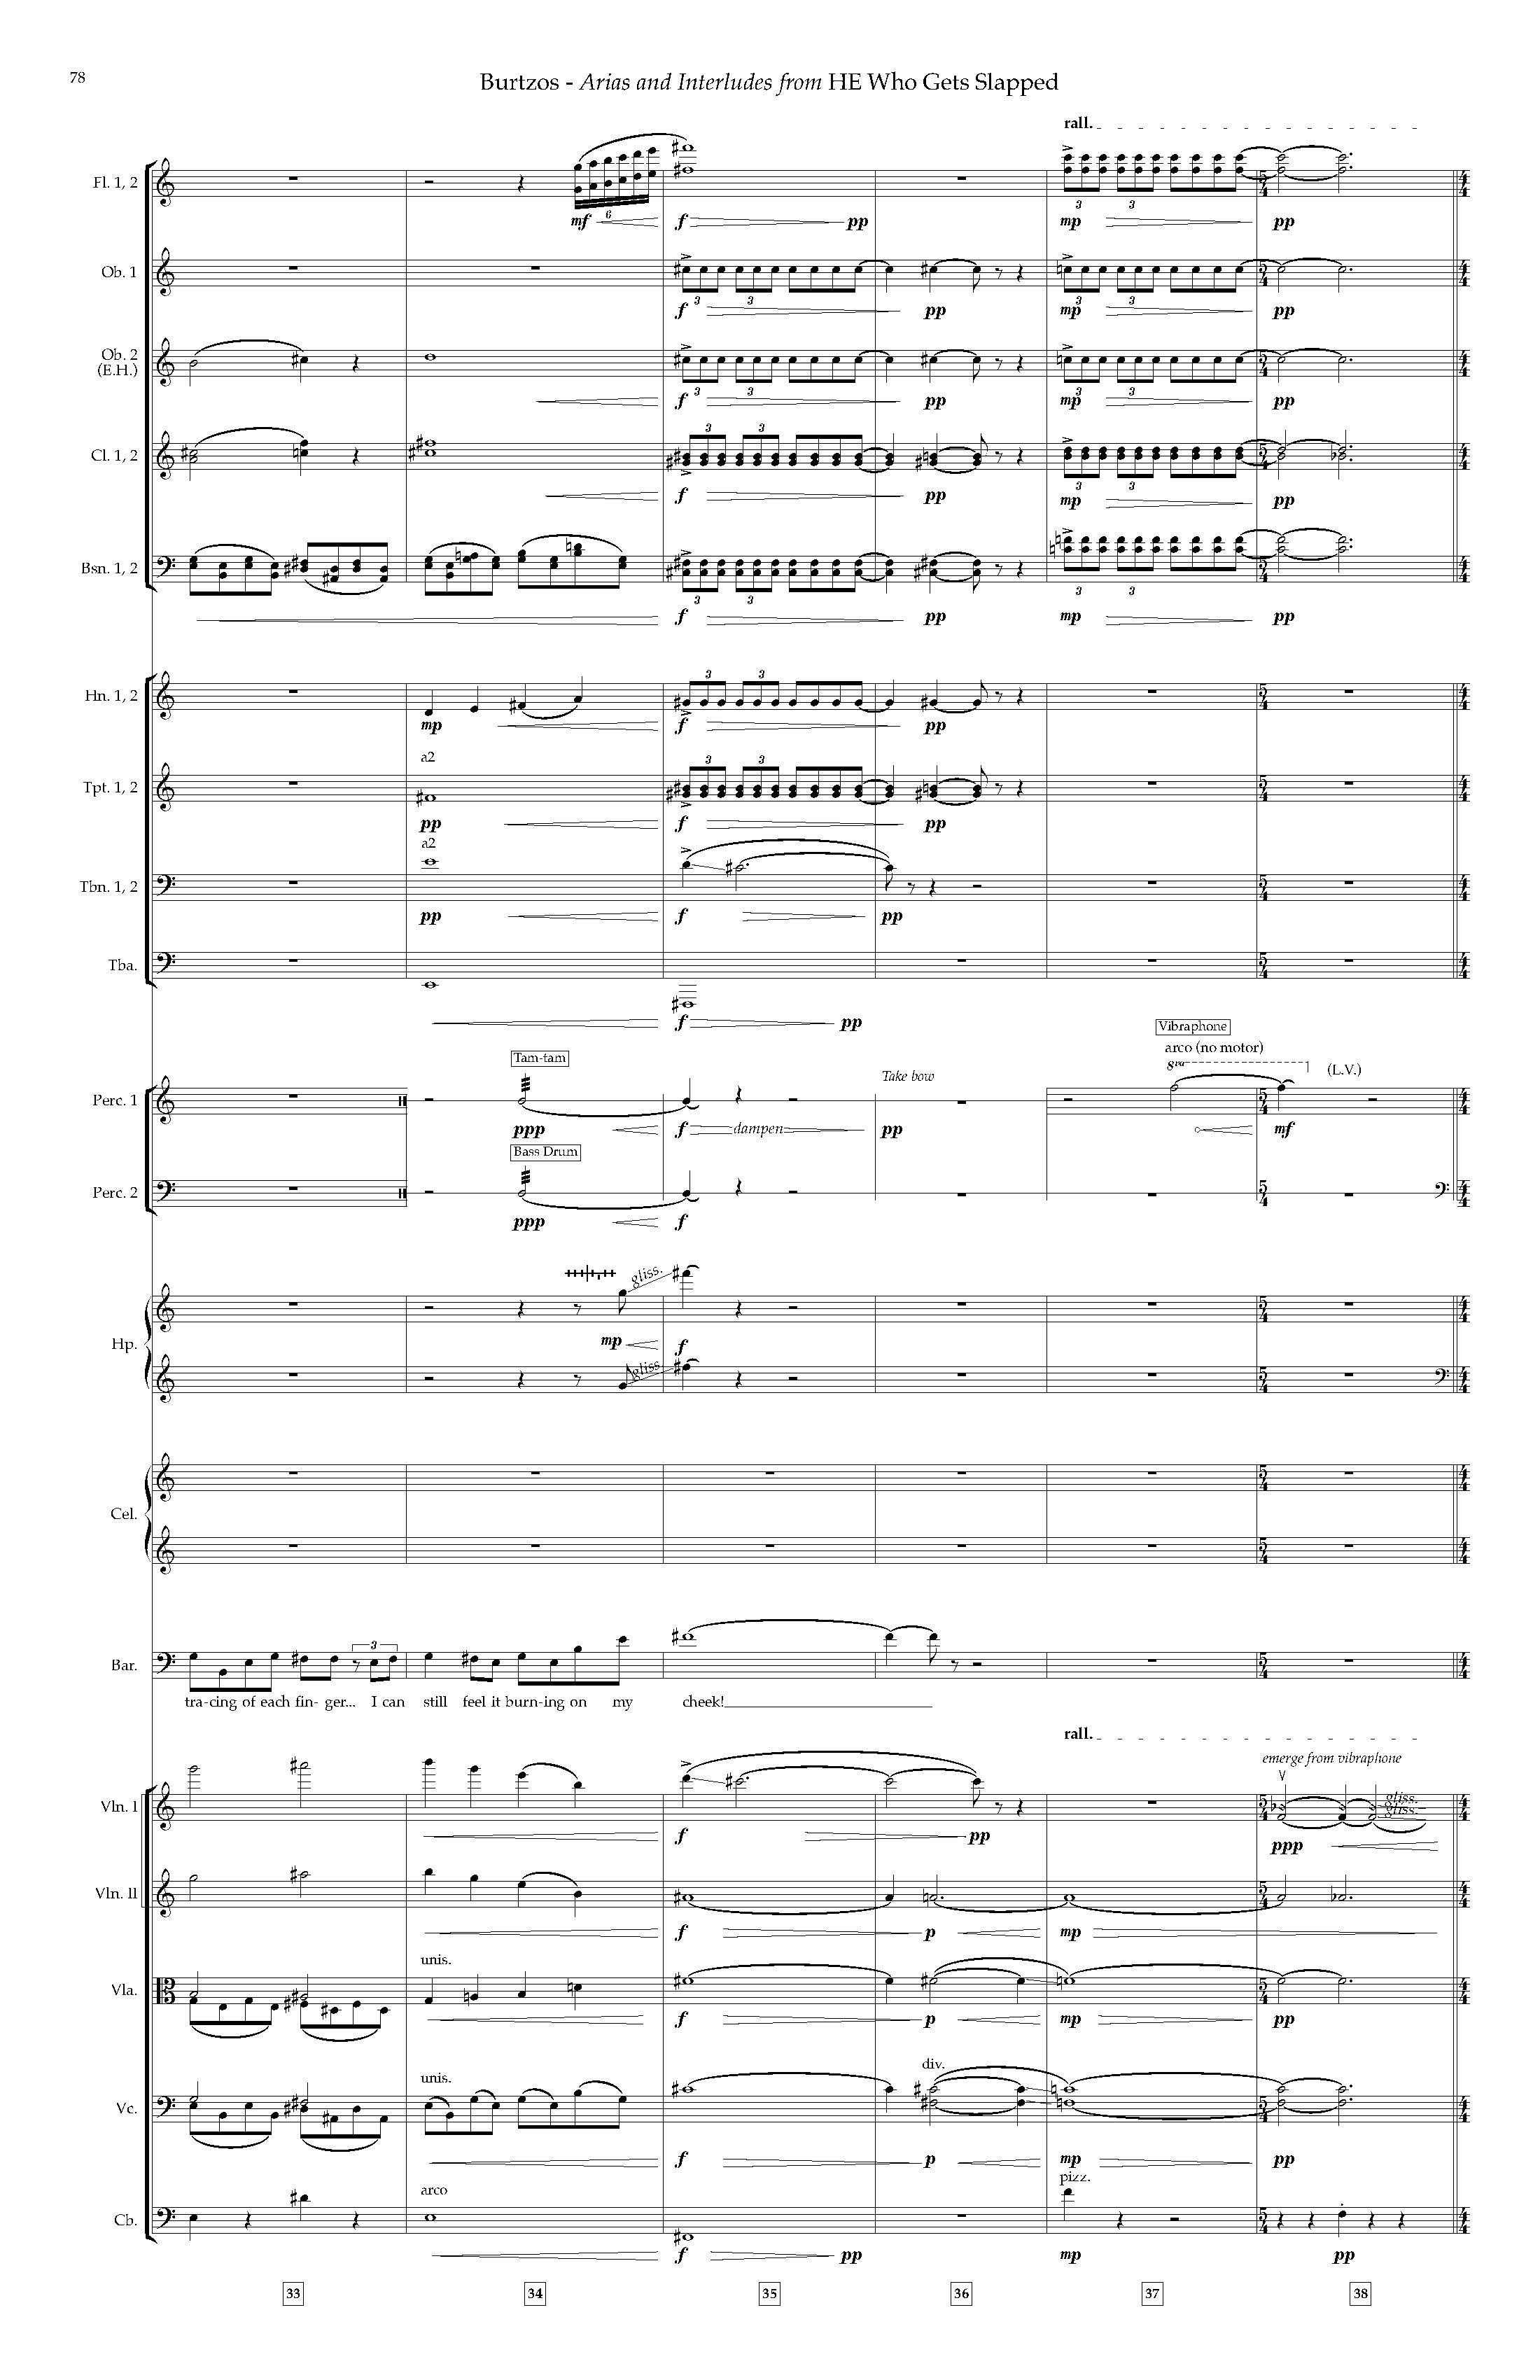 Arias and Interludes from HWGS - Complete Score_Page_84.jpg